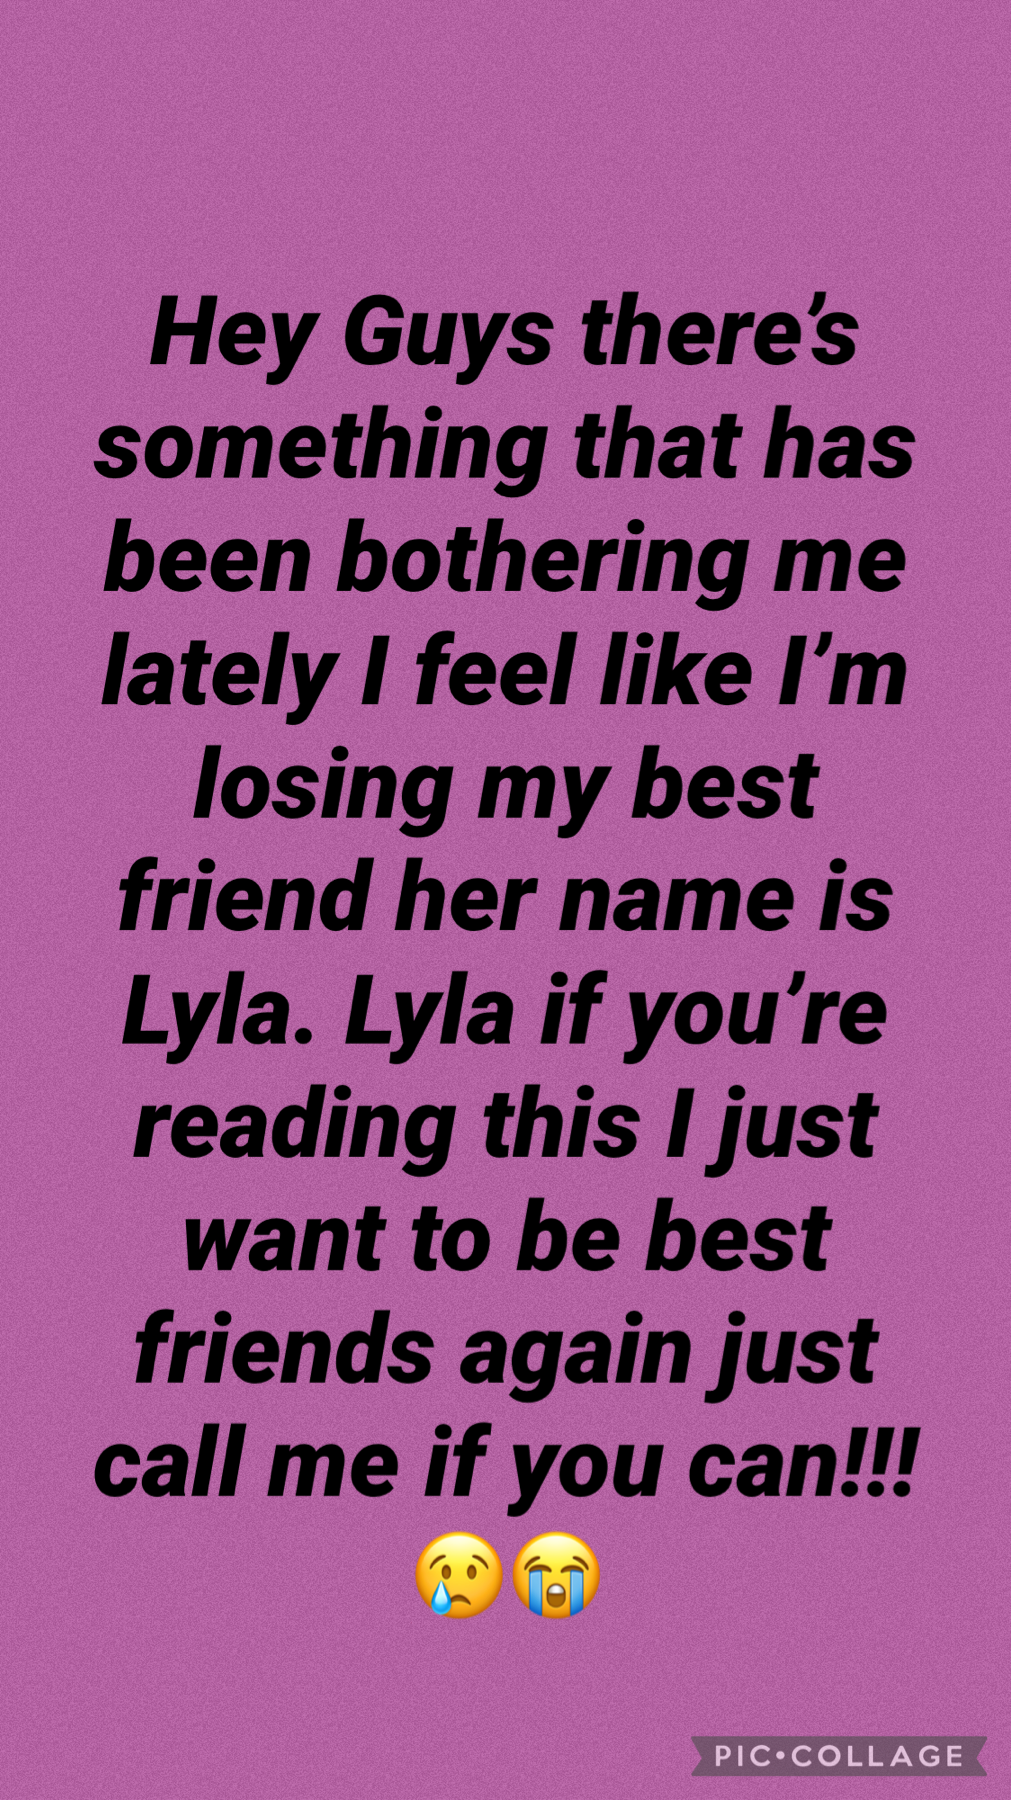 Lyla call me I want to be best friends again!!!😭😢